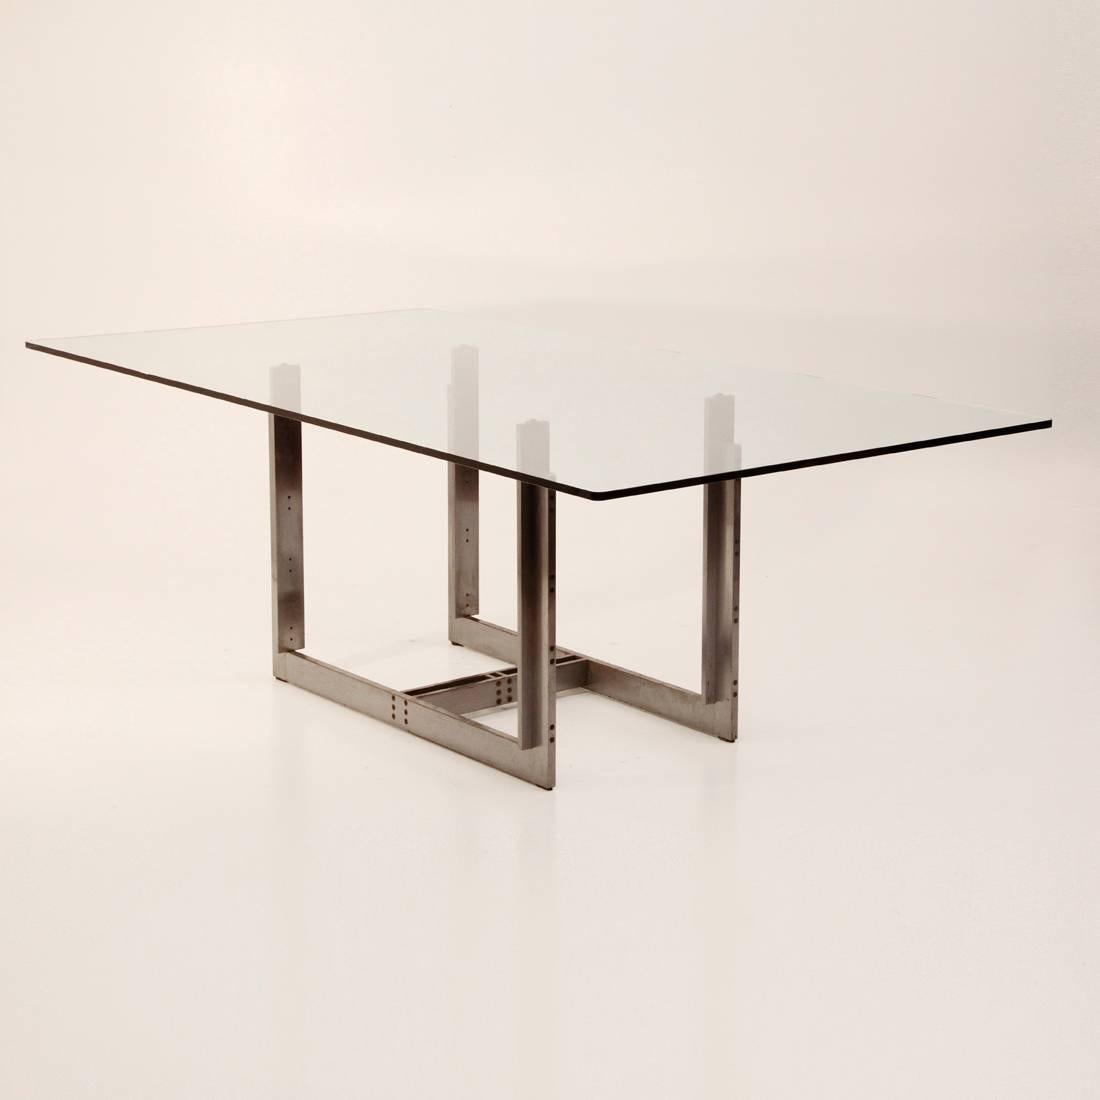 Table designed by Carlo Scarpa in 1974 for Simon.
Structure in extruded brushed metal, burnished screws, brass top spacers
thick glass rectangular top.
Good general condition, traces of rust on the frame.

Dimensions: Width 210 cm, Depth 110